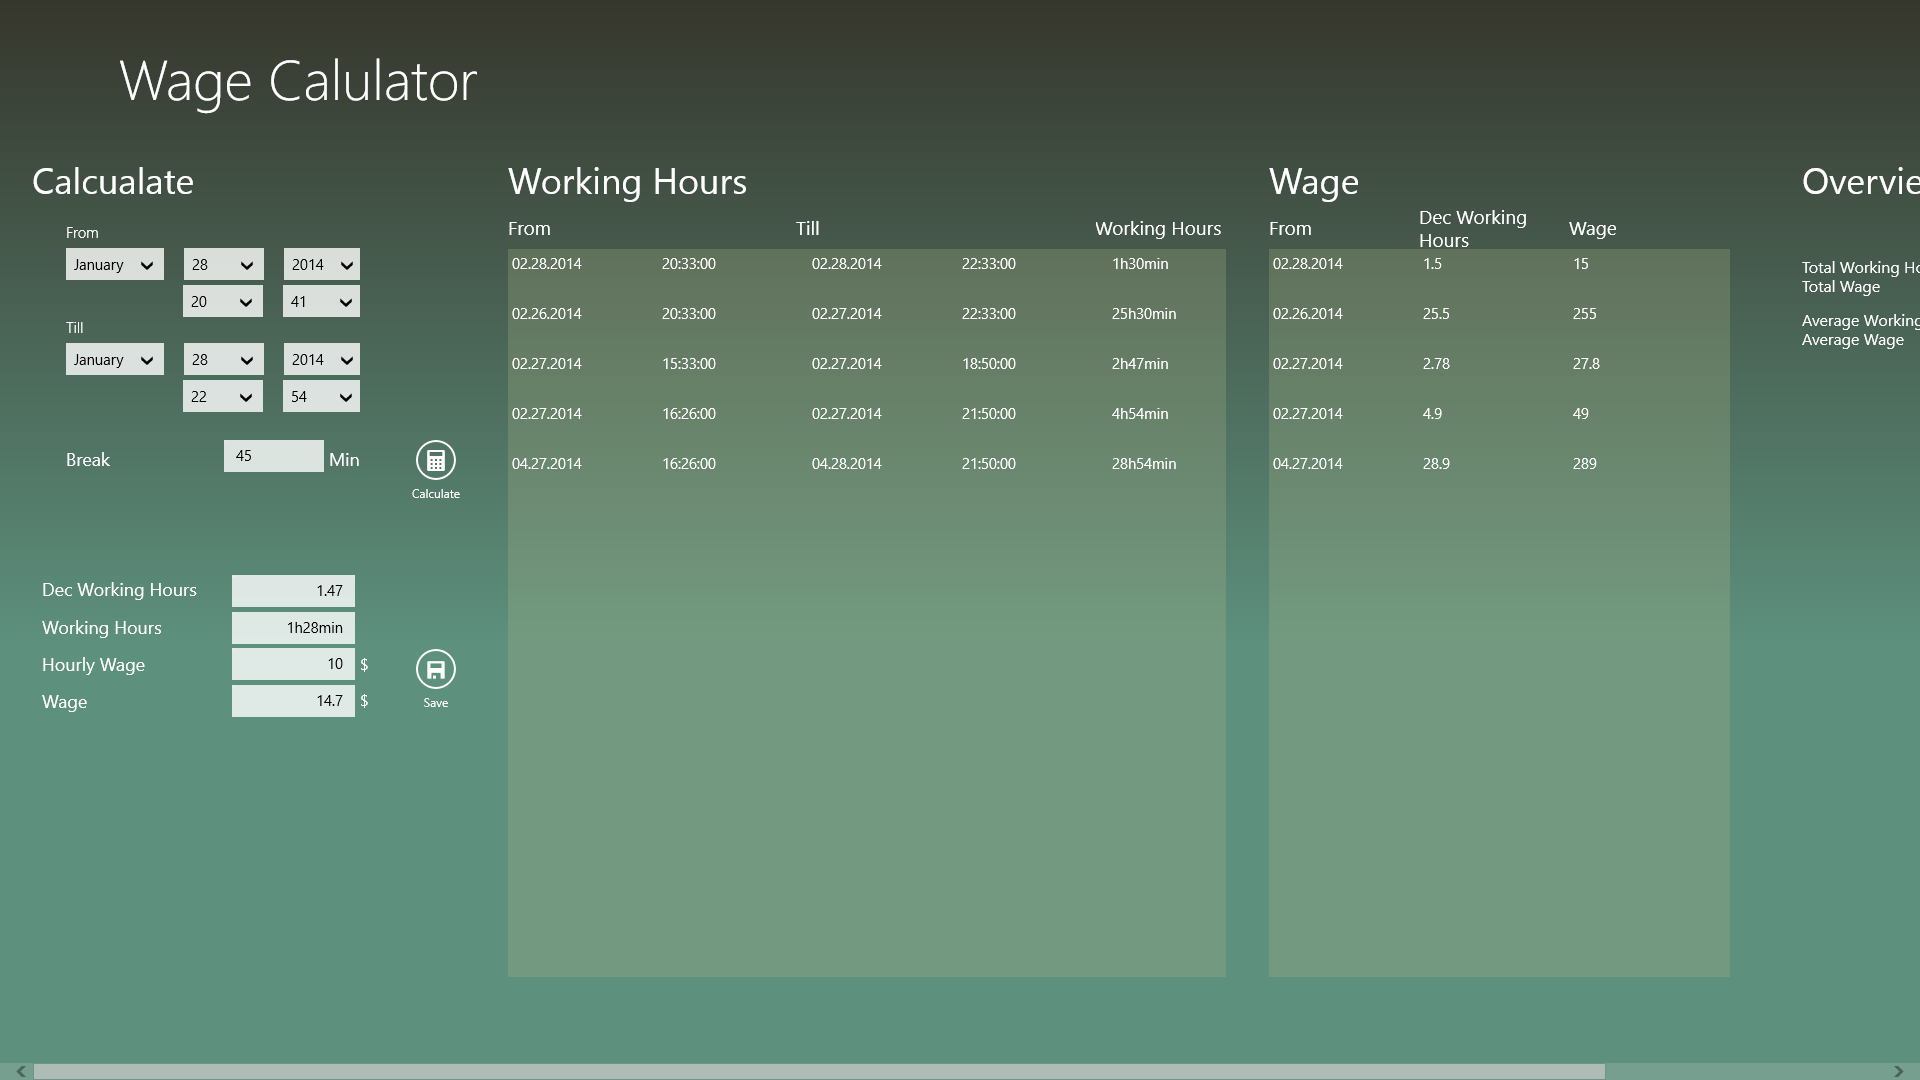 Calculate your wage based on your working hours